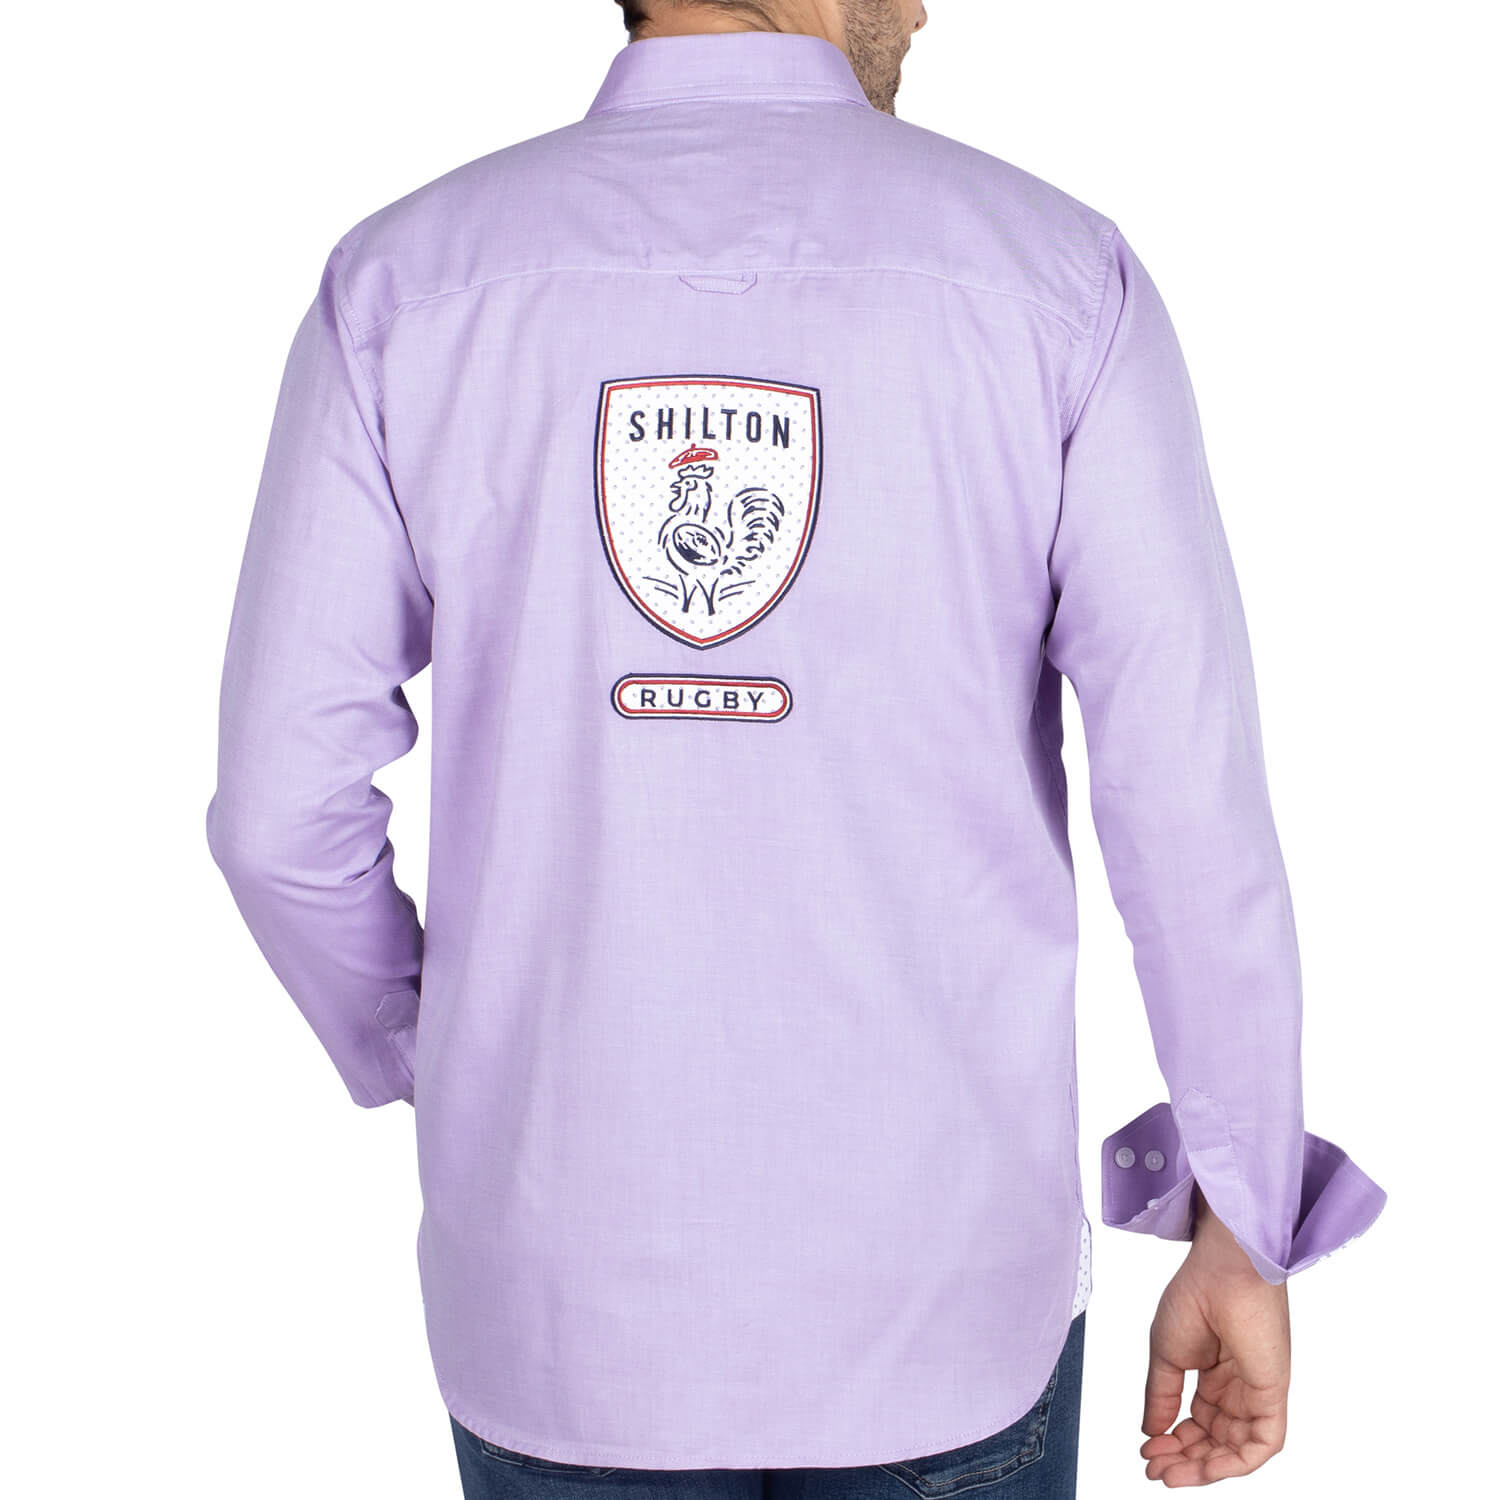 Chemise rugby authentic